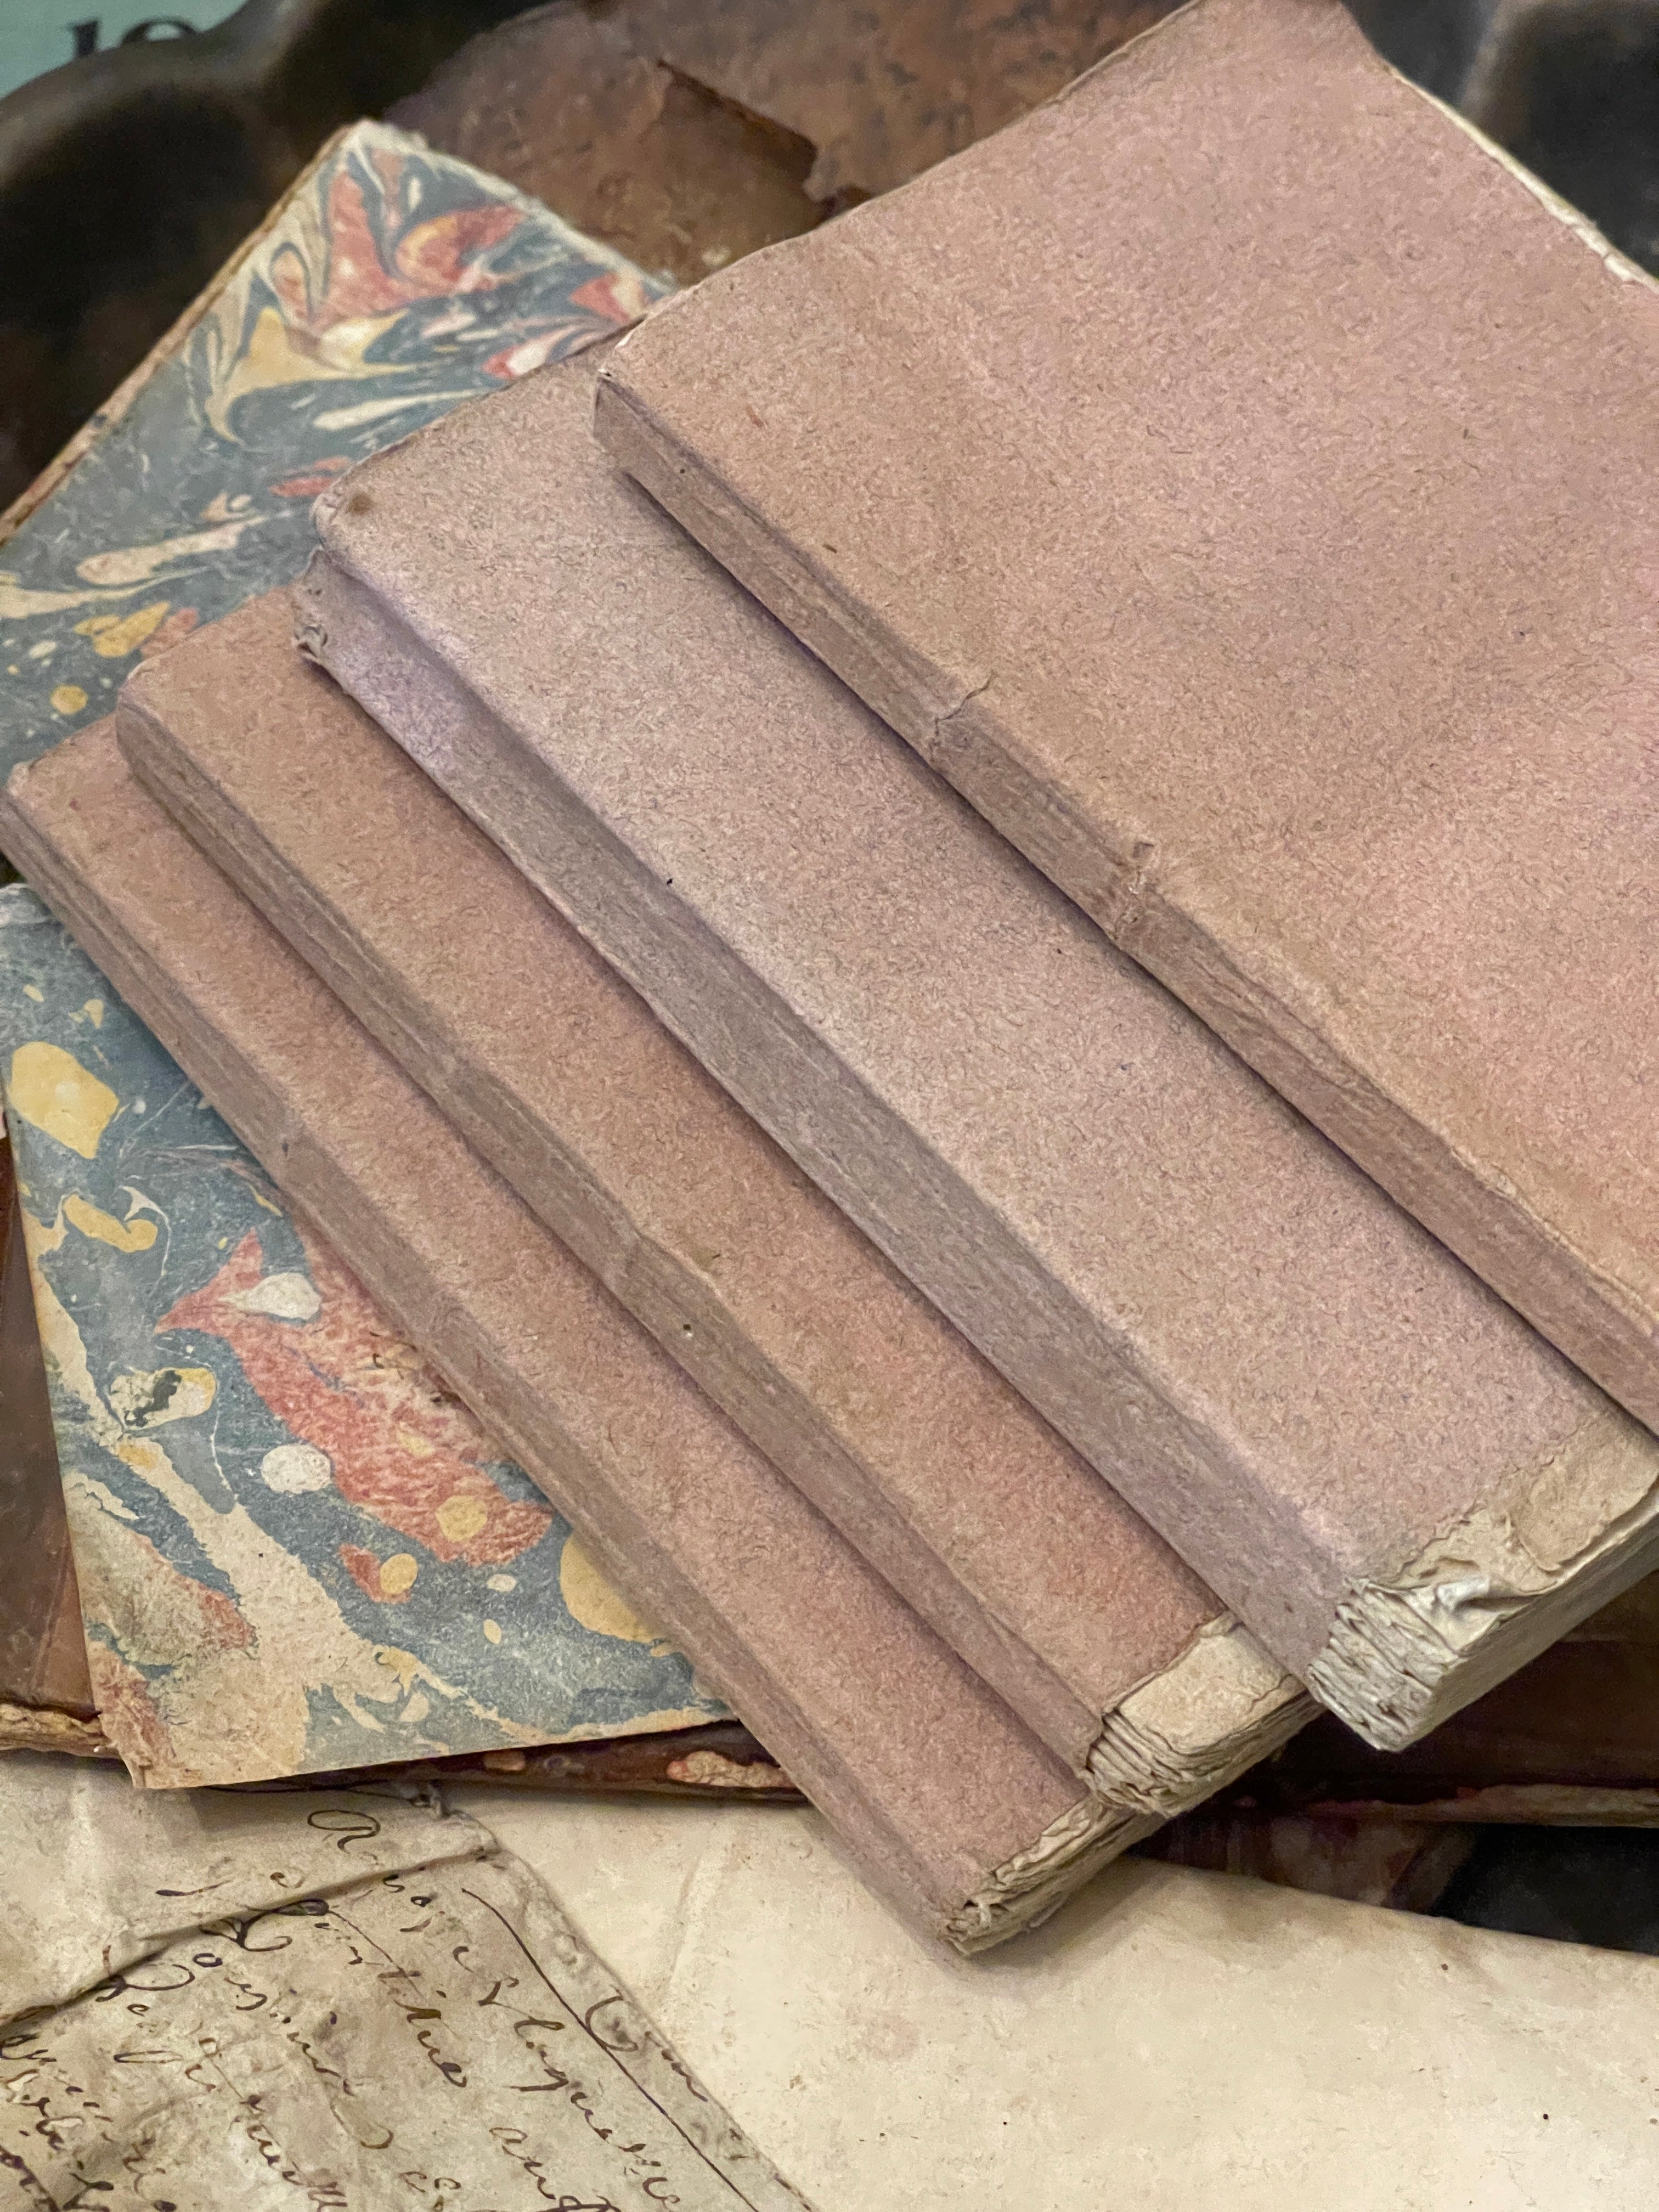 Darling Antique 1700's Pale Pink French Books